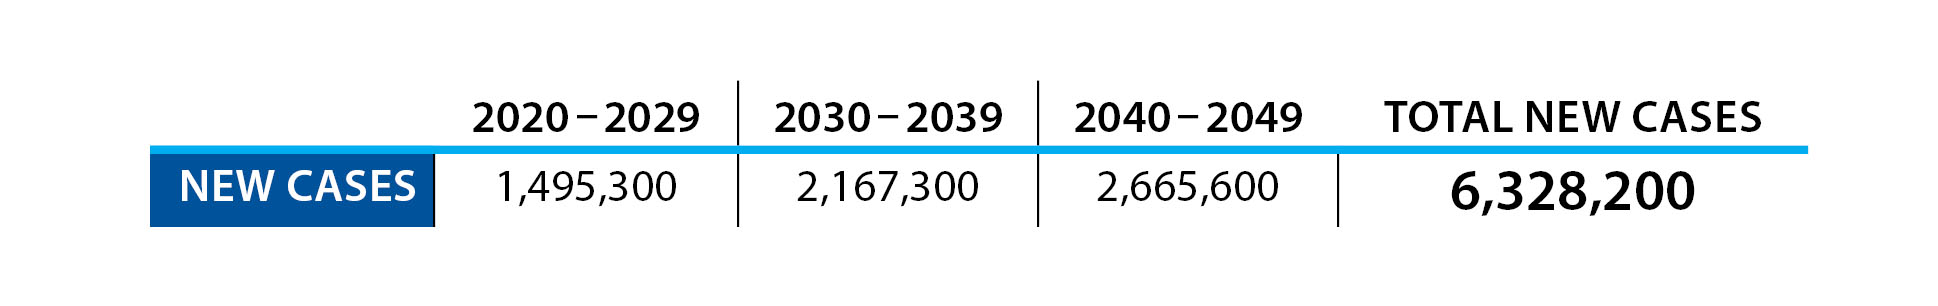 Table showing estimates for the total number of new cases of dementia by decade in Canada, 2020 – 2049